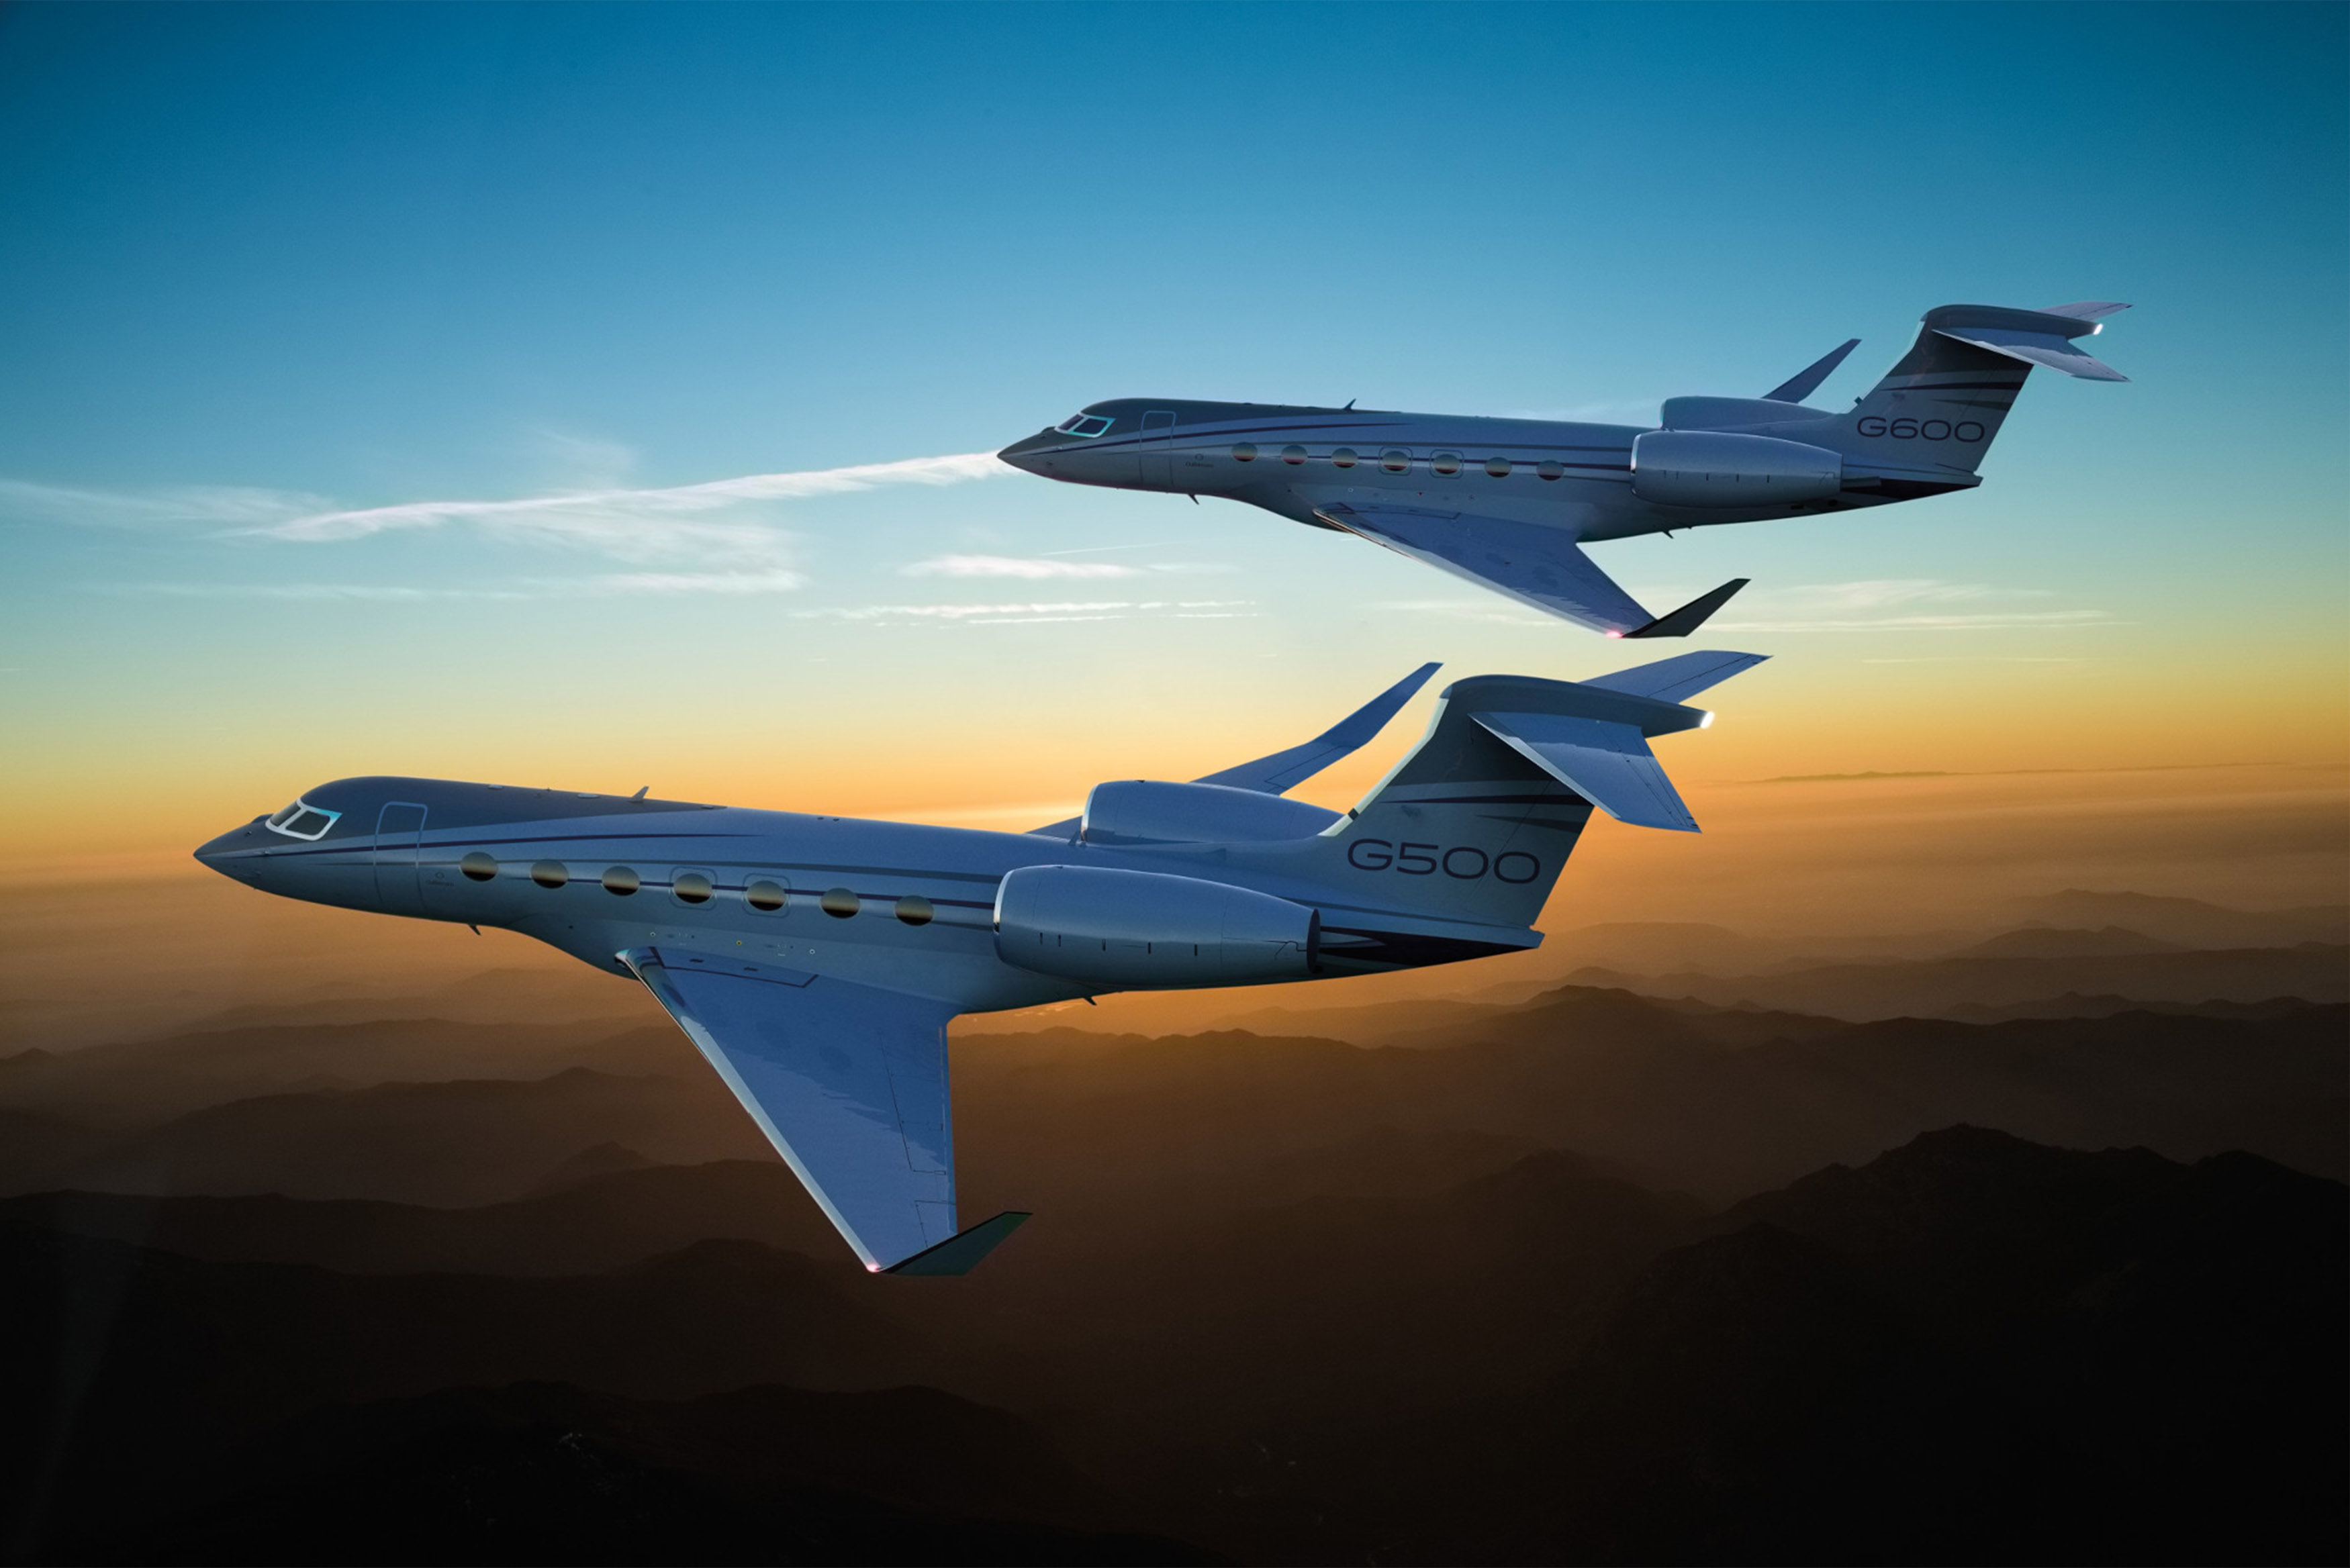 Gulfstream Aerospace’s G500 and G600 aircraft are part of the Savannah, Georgia-based business jet manufacturer’s fleet. Photo courtesy of Gulfstream Aerospace.